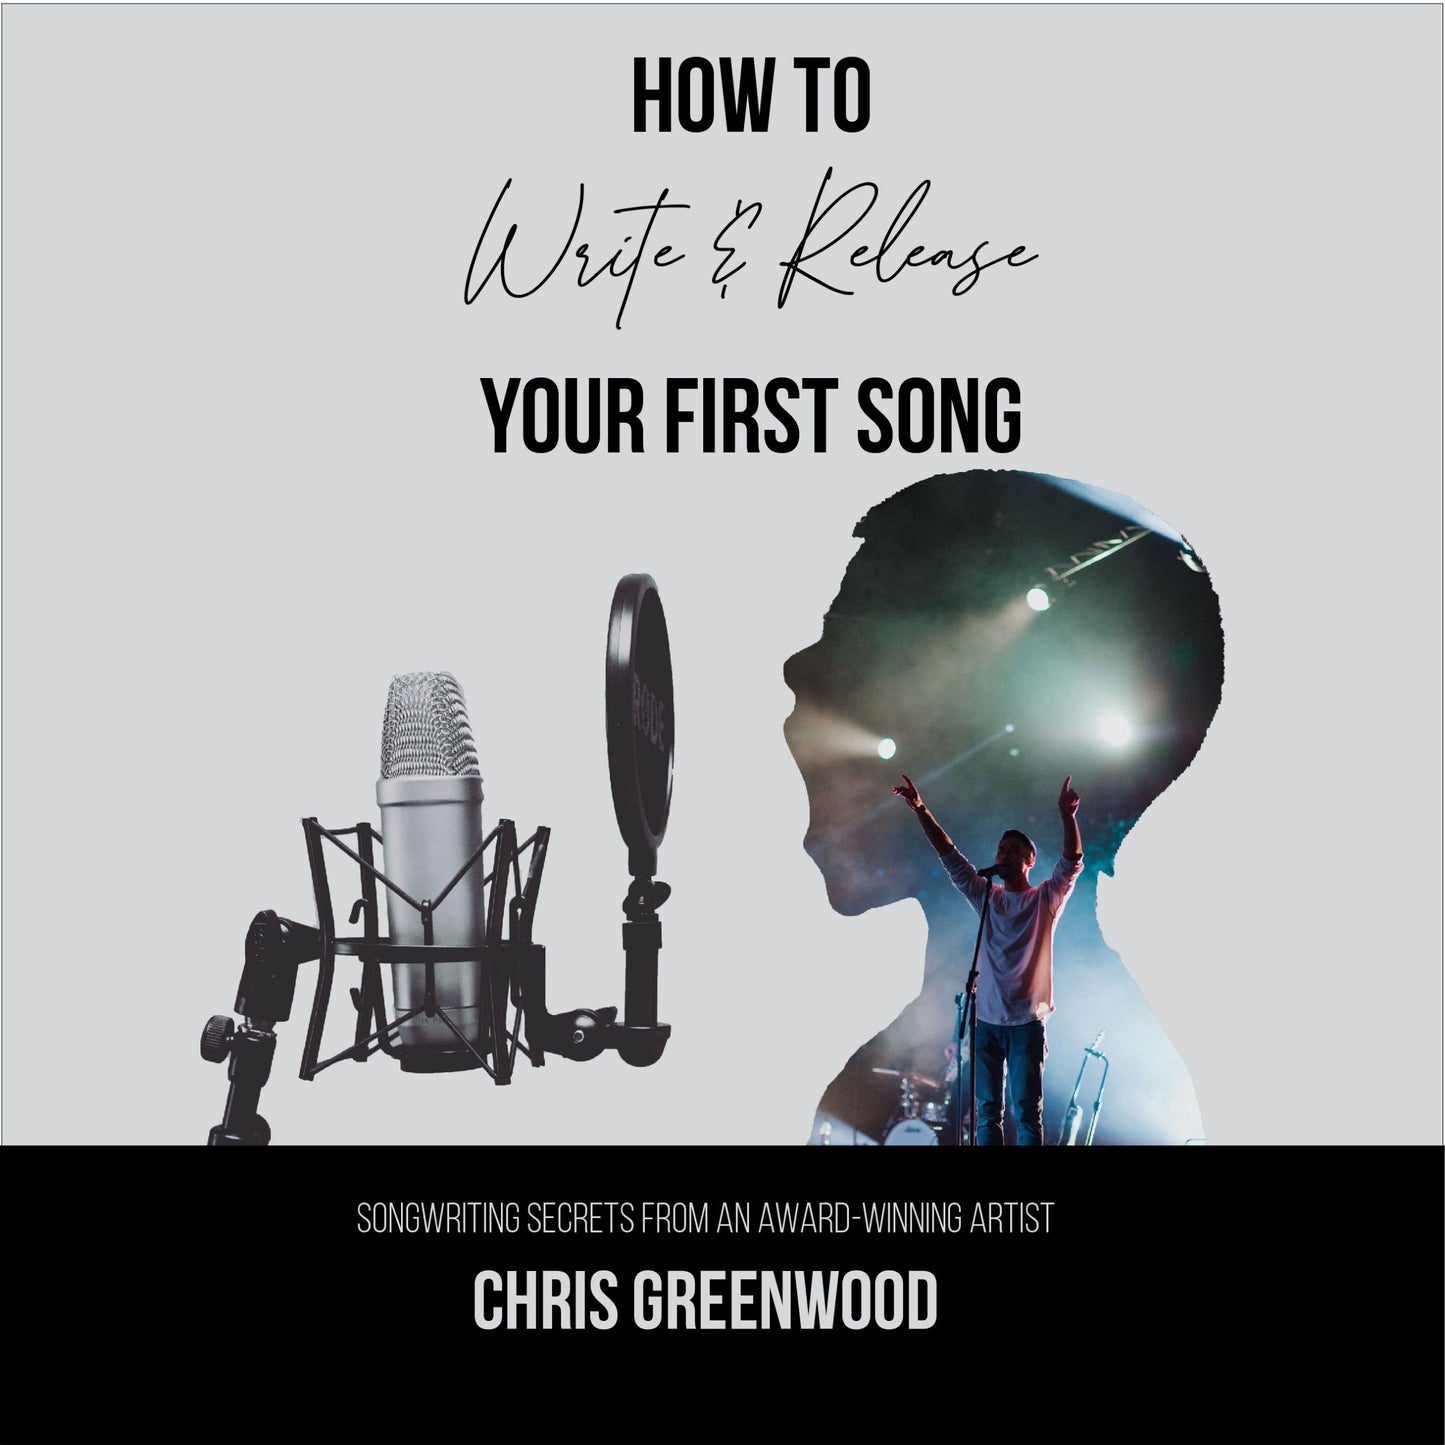 How To Write & Release Your First Song| Audio Book